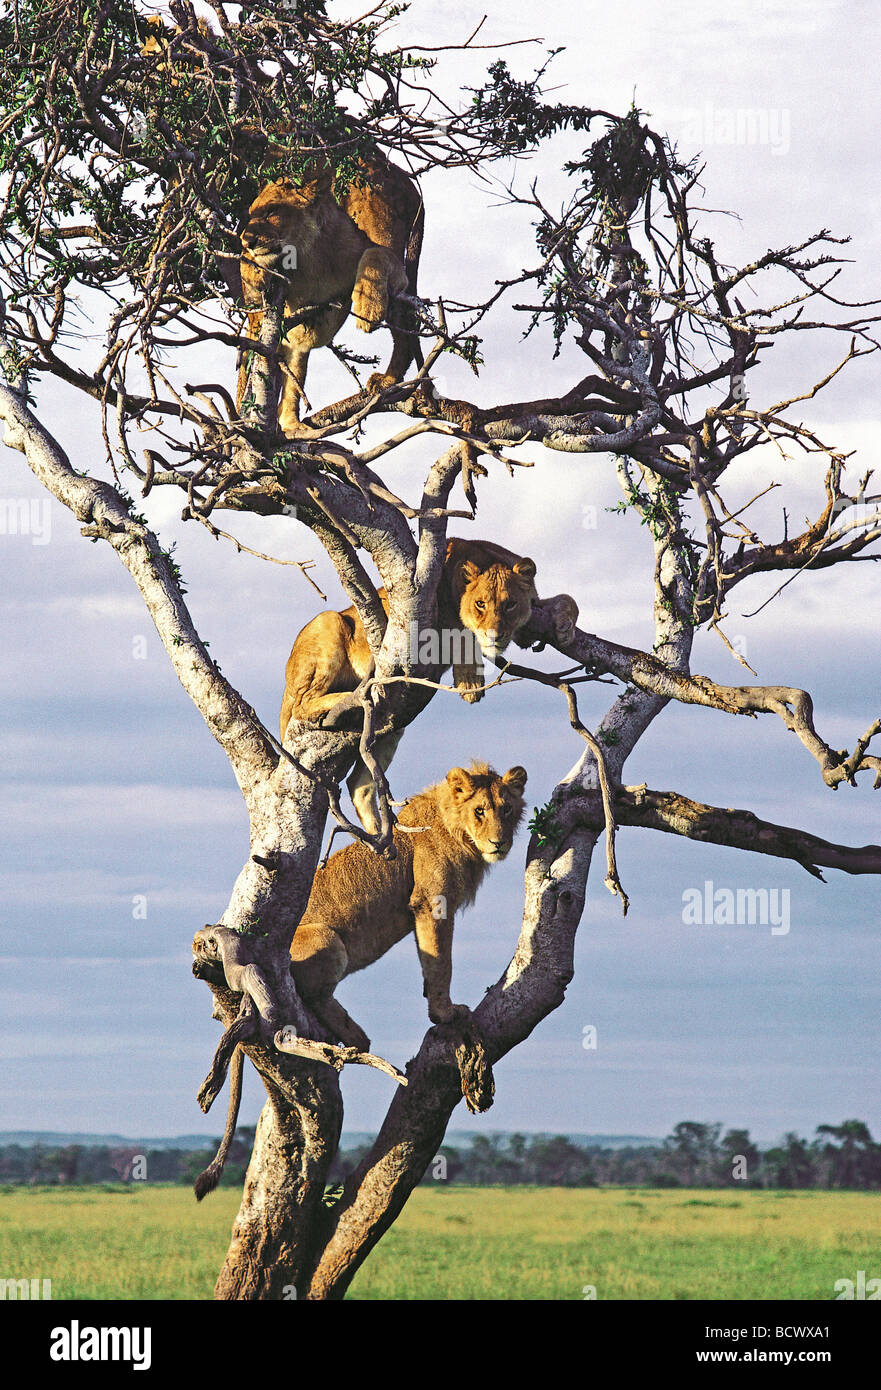 Four tree climbing lions high in the branches of old balanites tree Masai Mara National Reserve Kenya East Africa Stock Photo